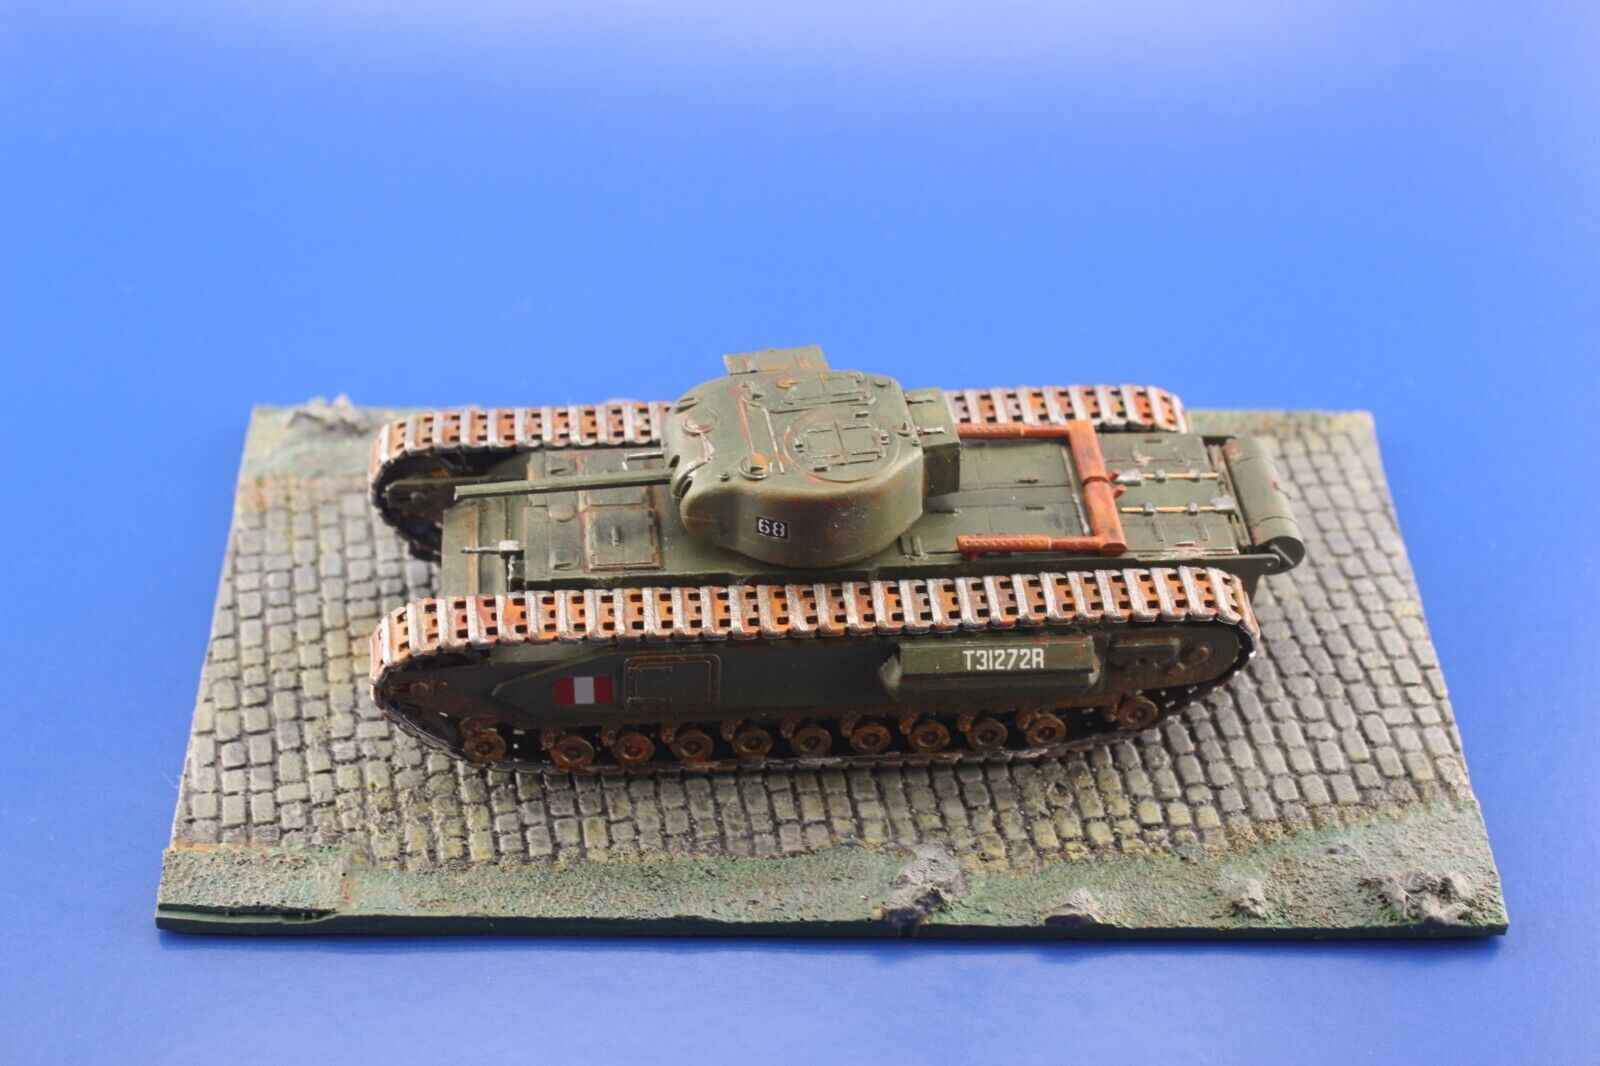 1/72 Diorama Display Base for Military Scale Model Tanks & Vehicles 1